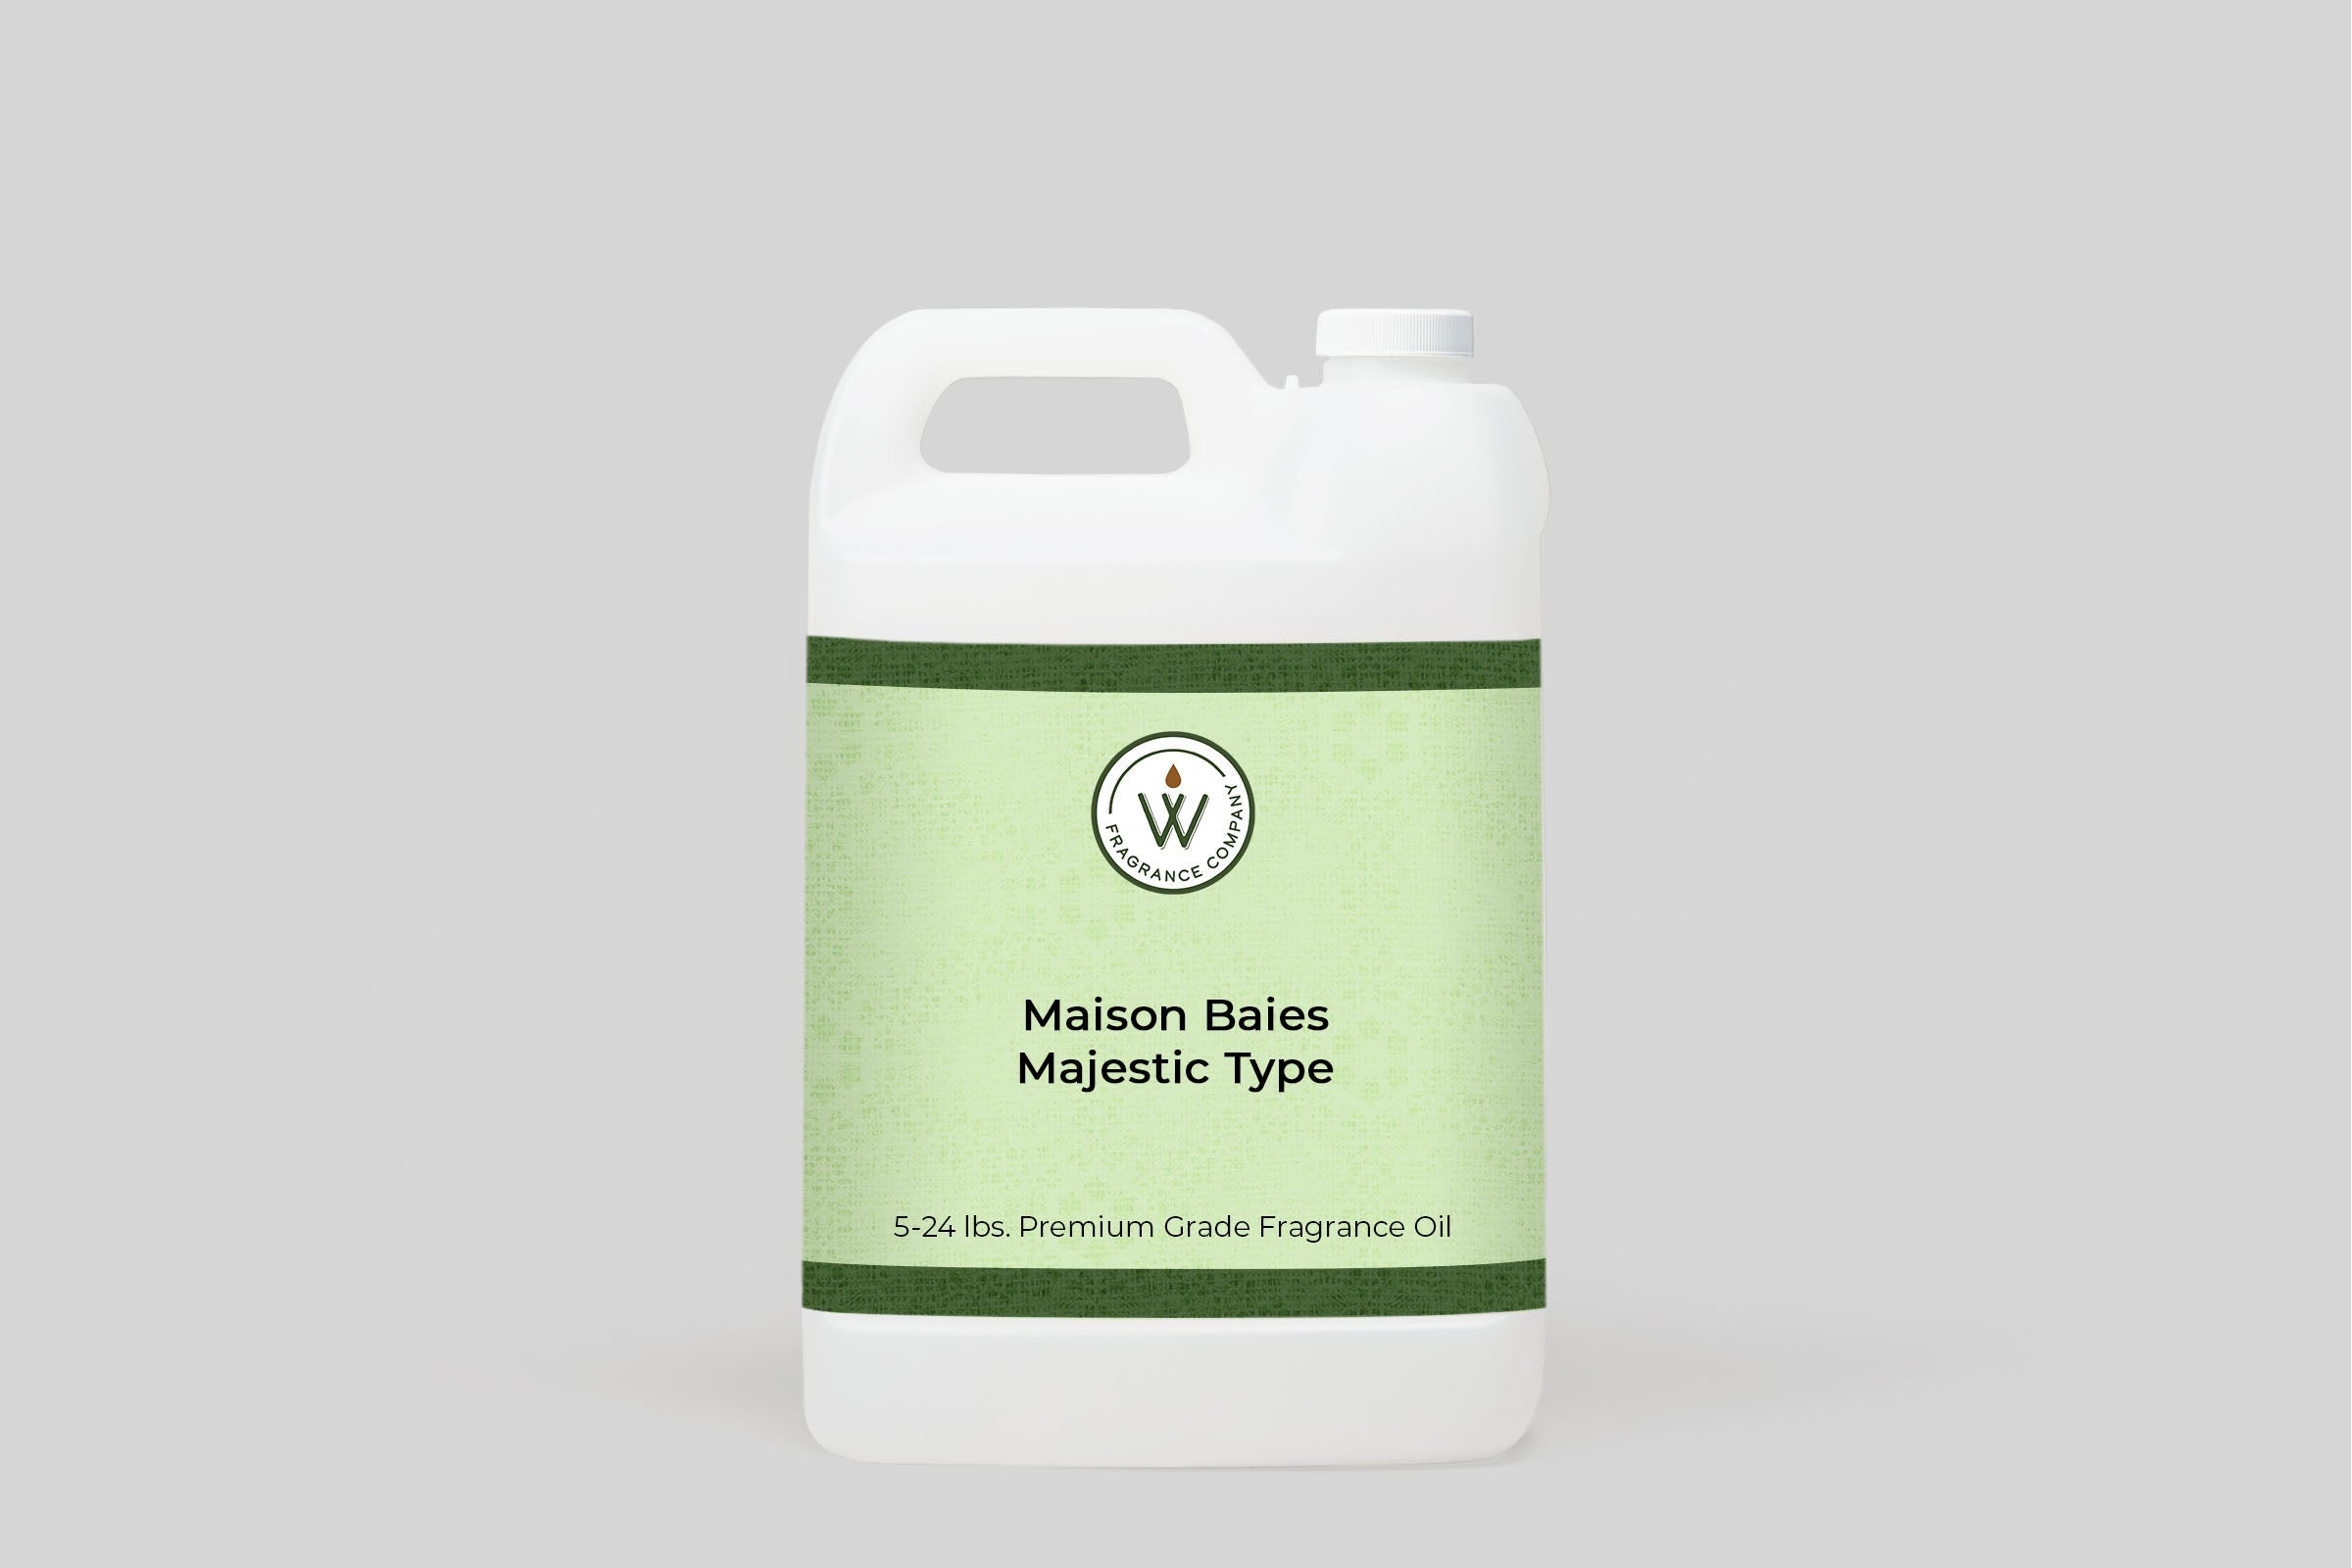 Maison Baies Majestic Type Fragrance Oil